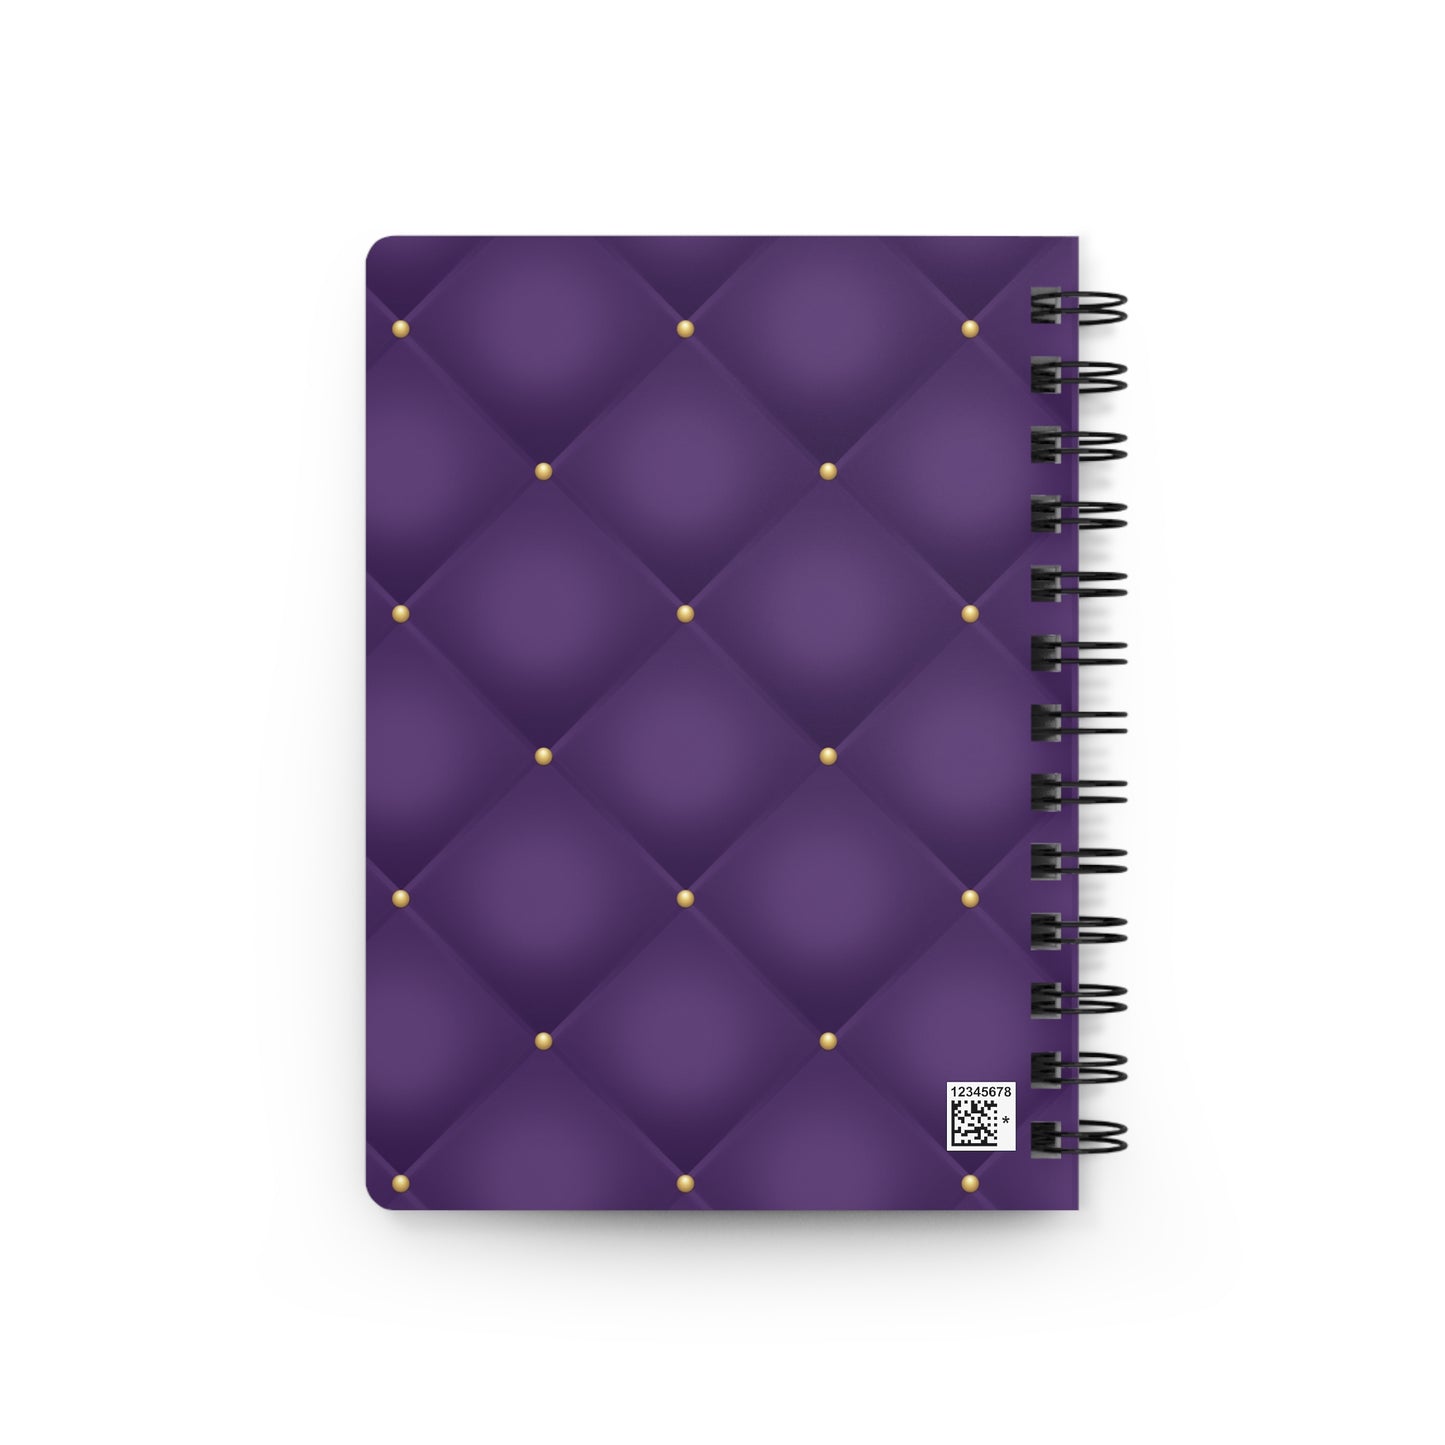 Stop for one minute Tufted Print Purple and Gold Spiral Bound Journal